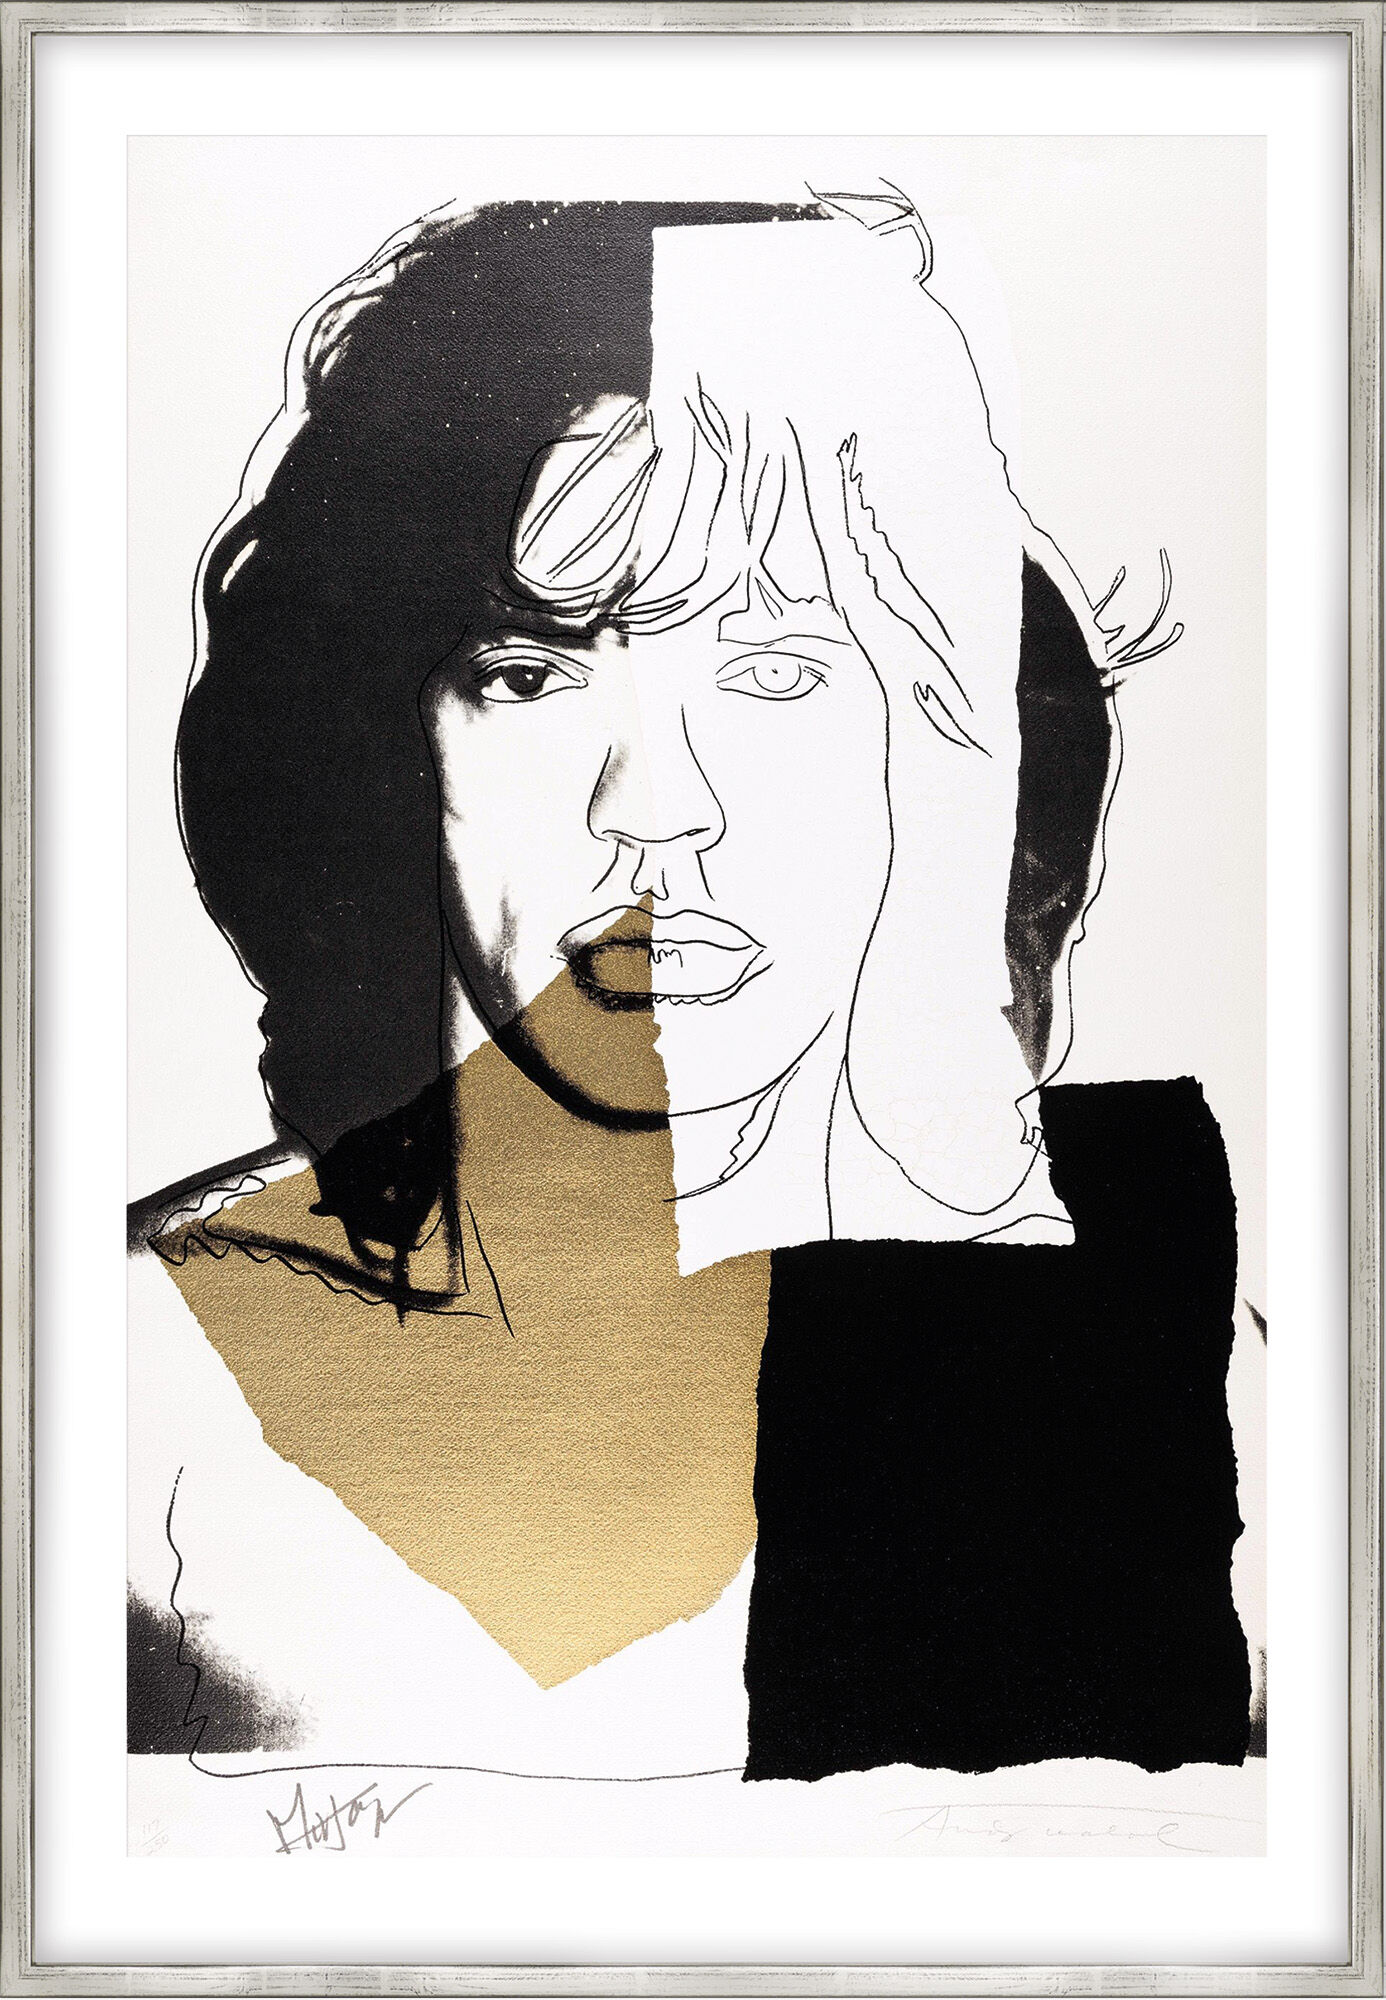 Picture "Mick Jagger (FS.2 146)" (1975) by Andy Warhol